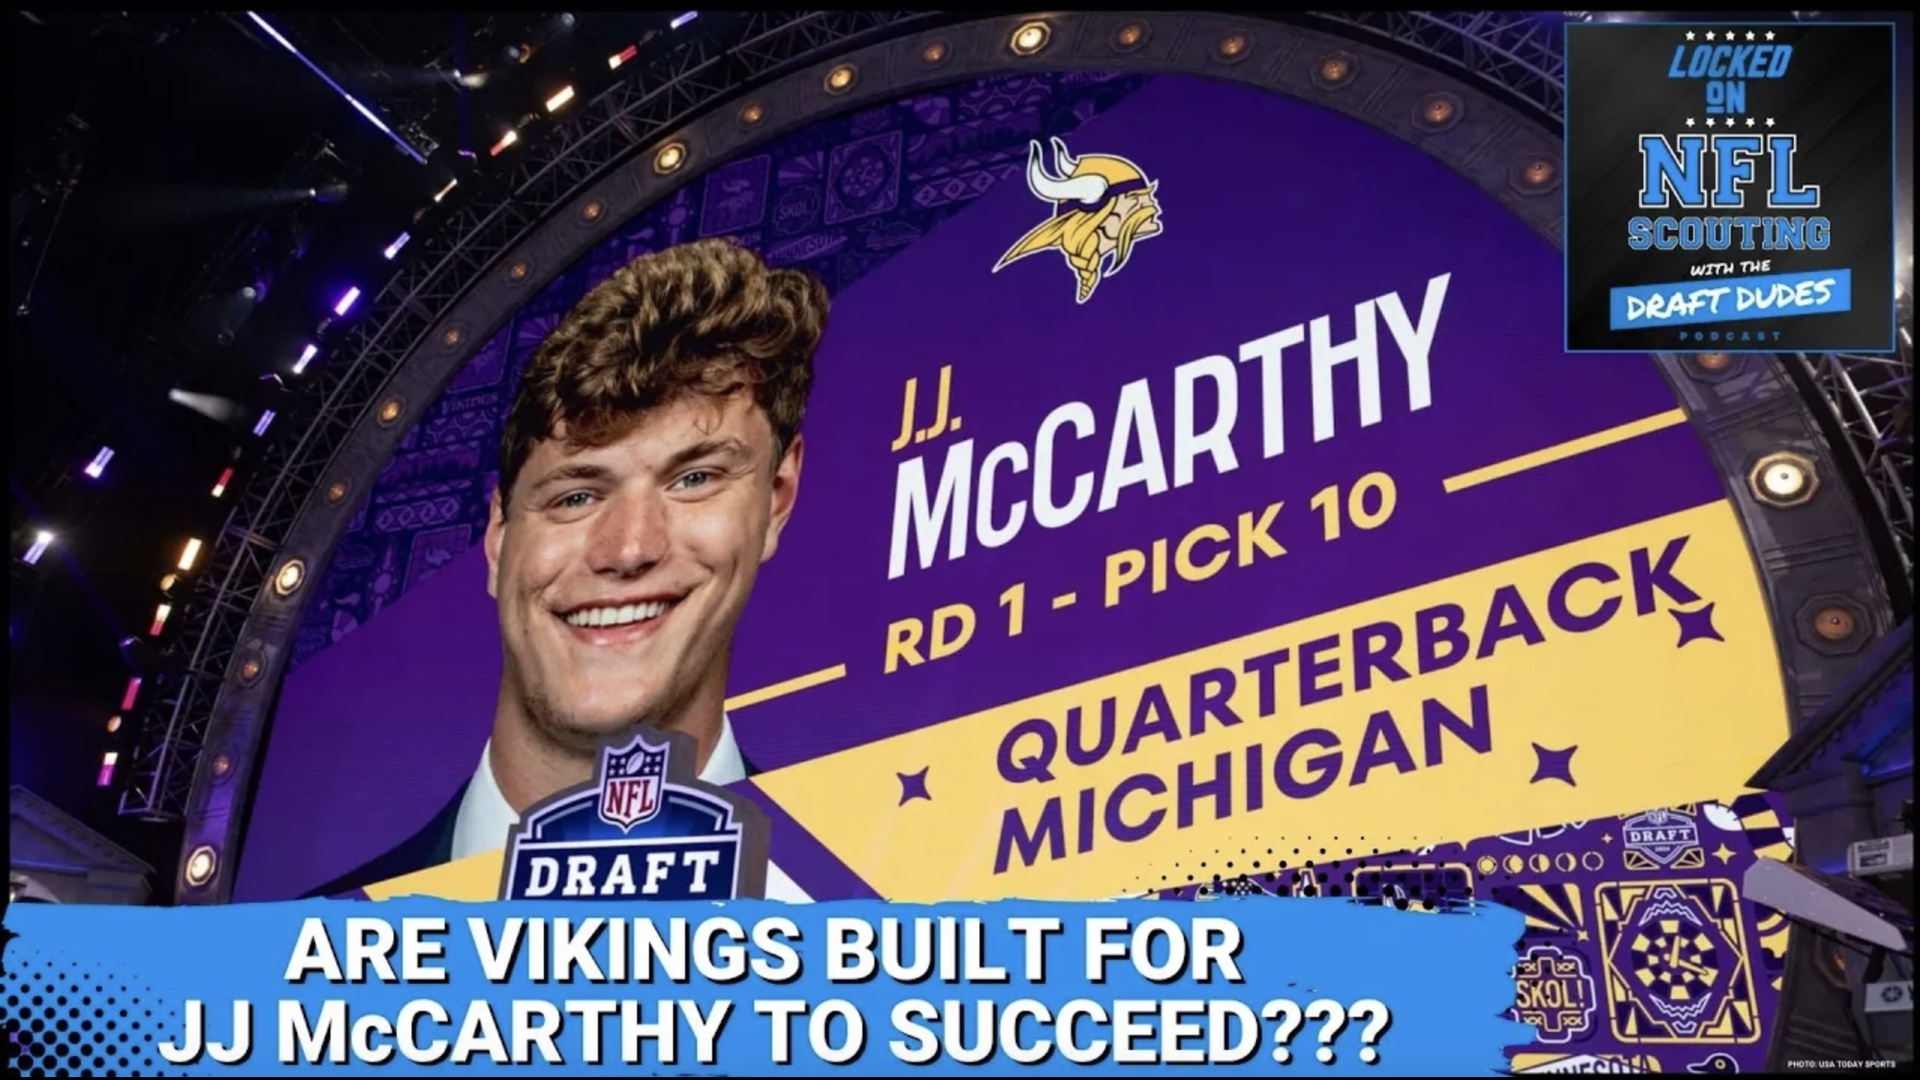 So how are the Minnesota Vikings  built around J.J. McCarthy to foster an environment conducive for success?